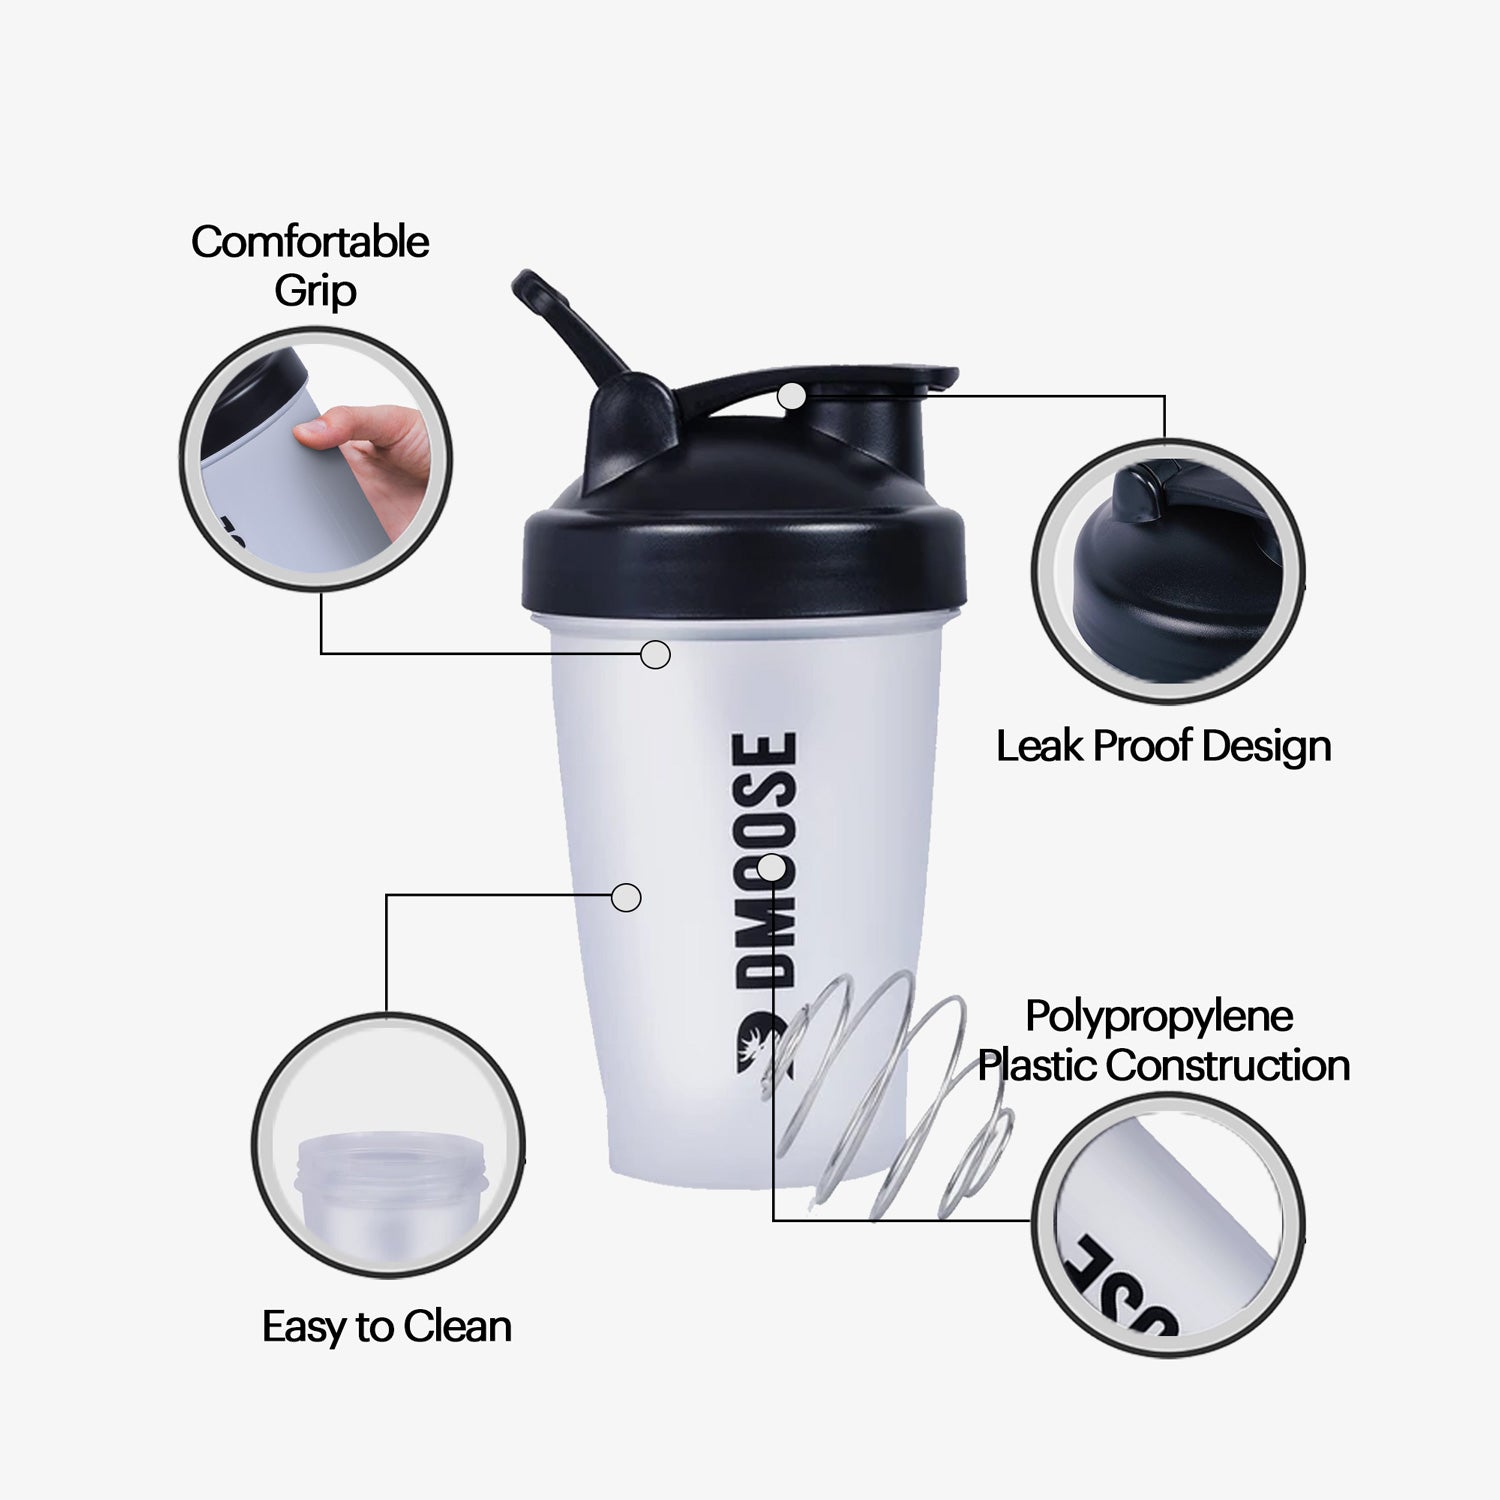 Sports Shaker Water Cup With Small Metal Stirring Ball, Protein